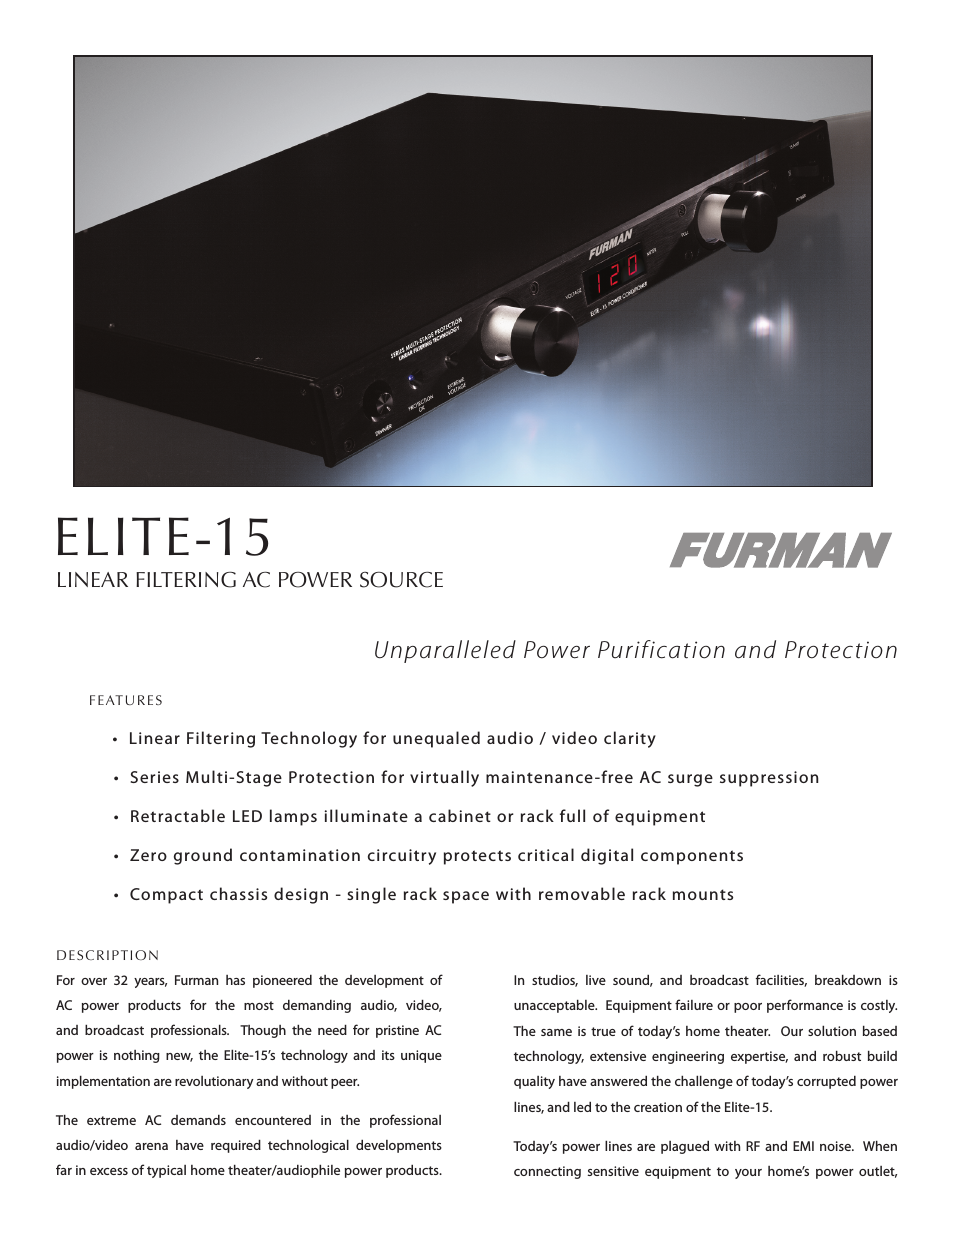 Linear Filtering AC Power Source Elite-15